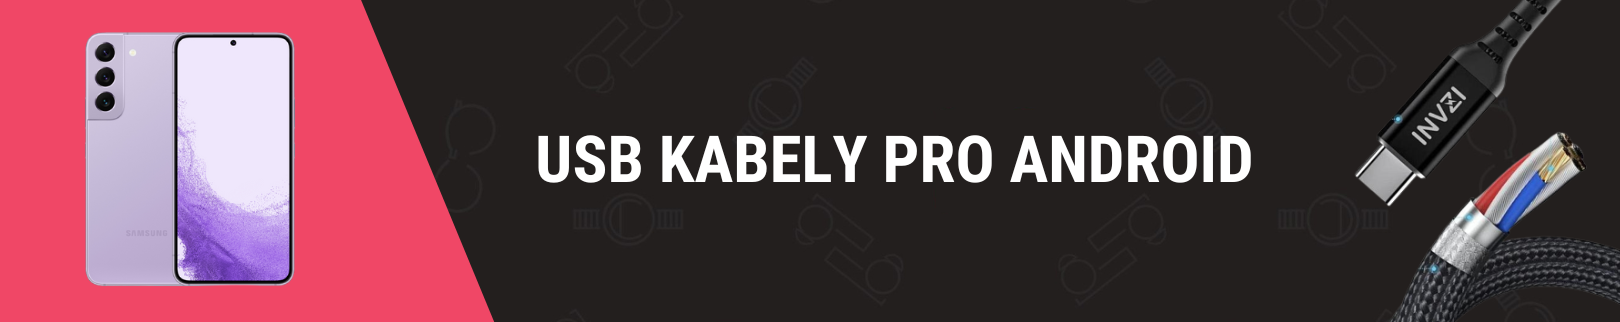 USB KABELY PRO ANDROID